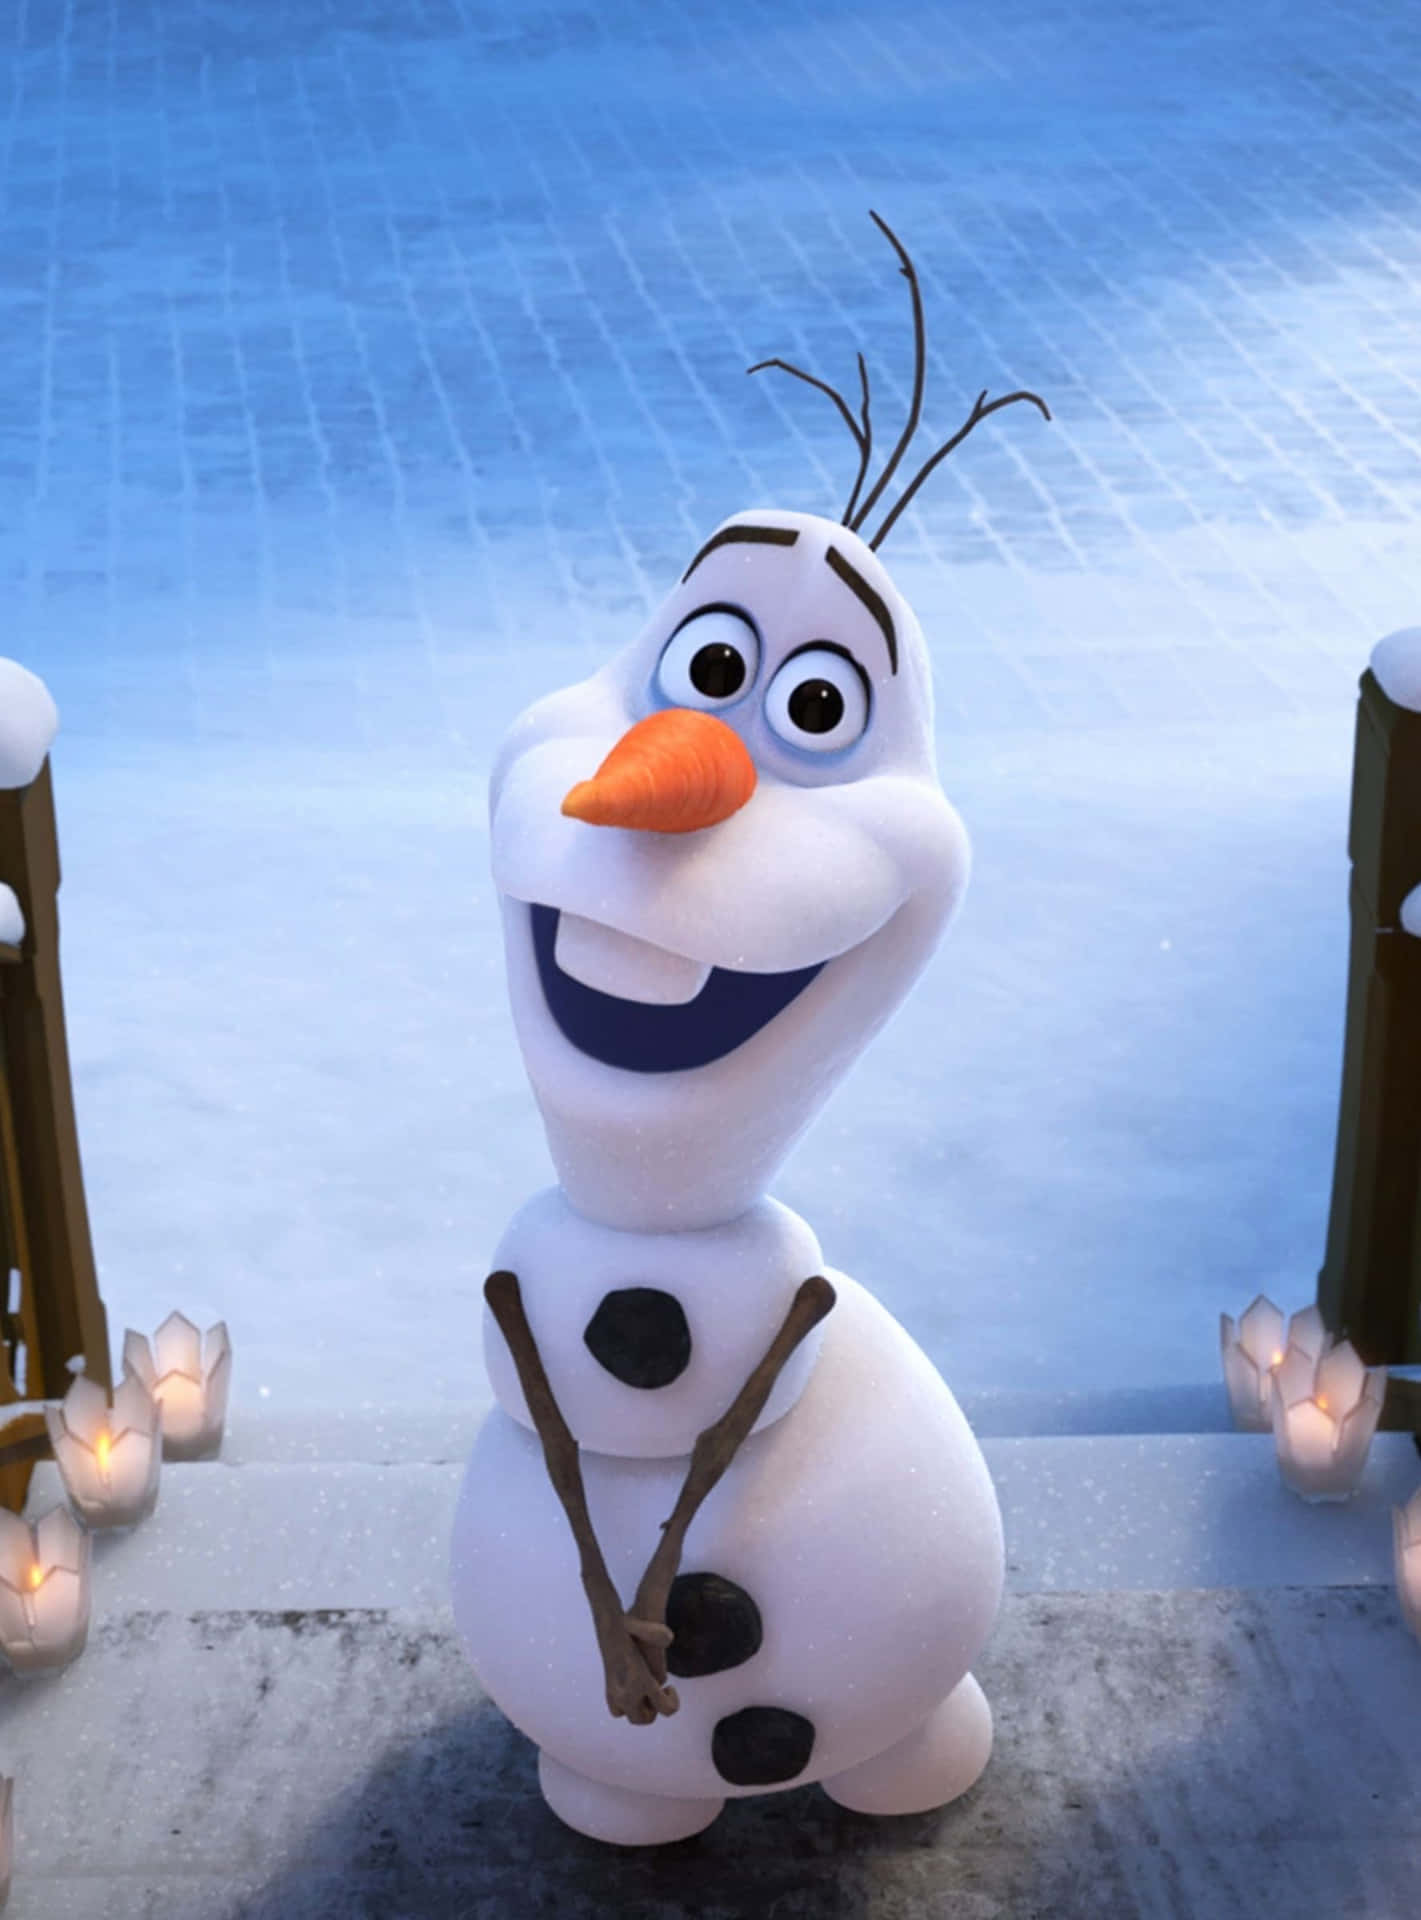 Happiness is Watching the Snowman Grow!